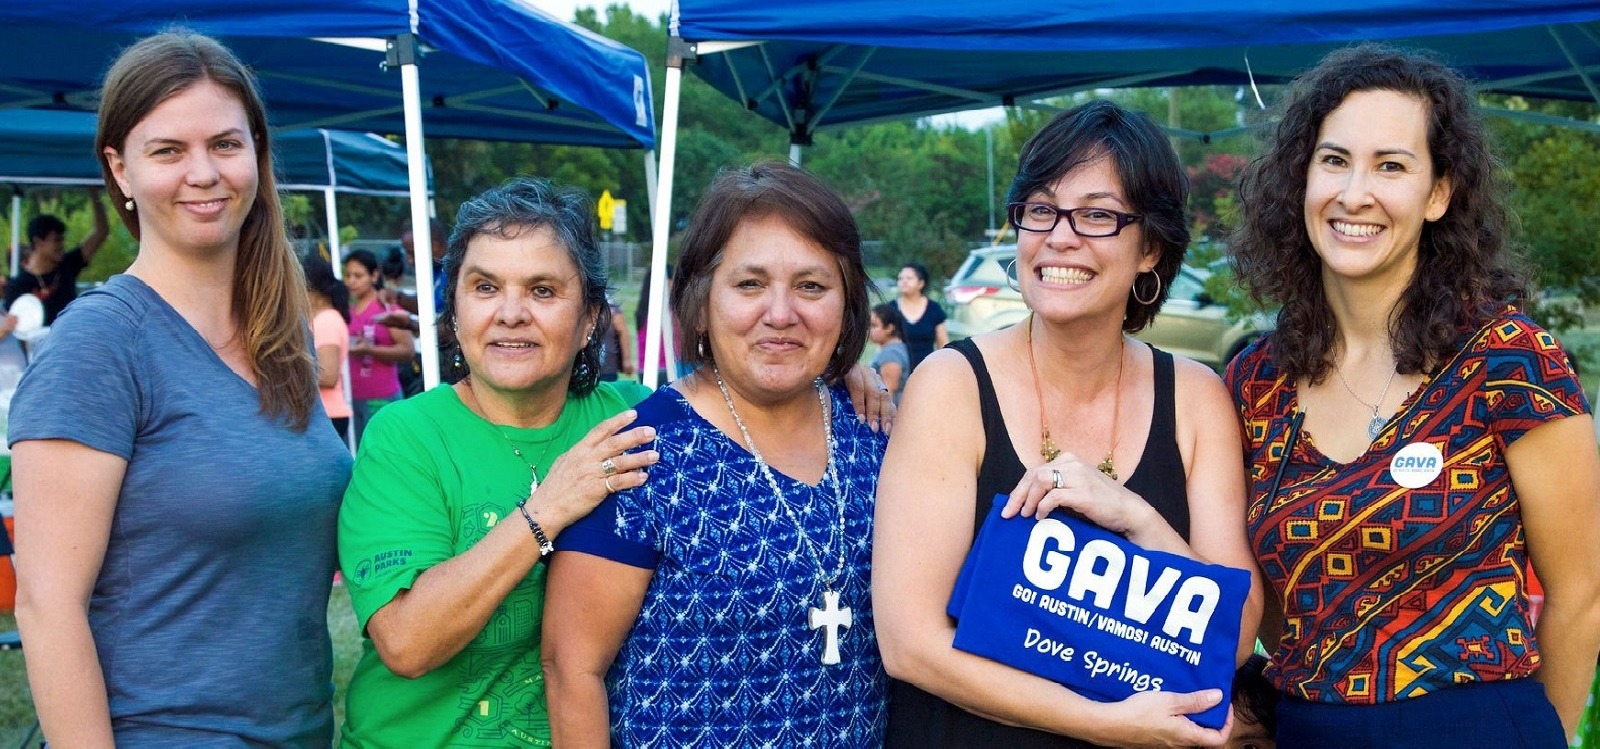 Five women stand together; one is holding up a GAVA sign